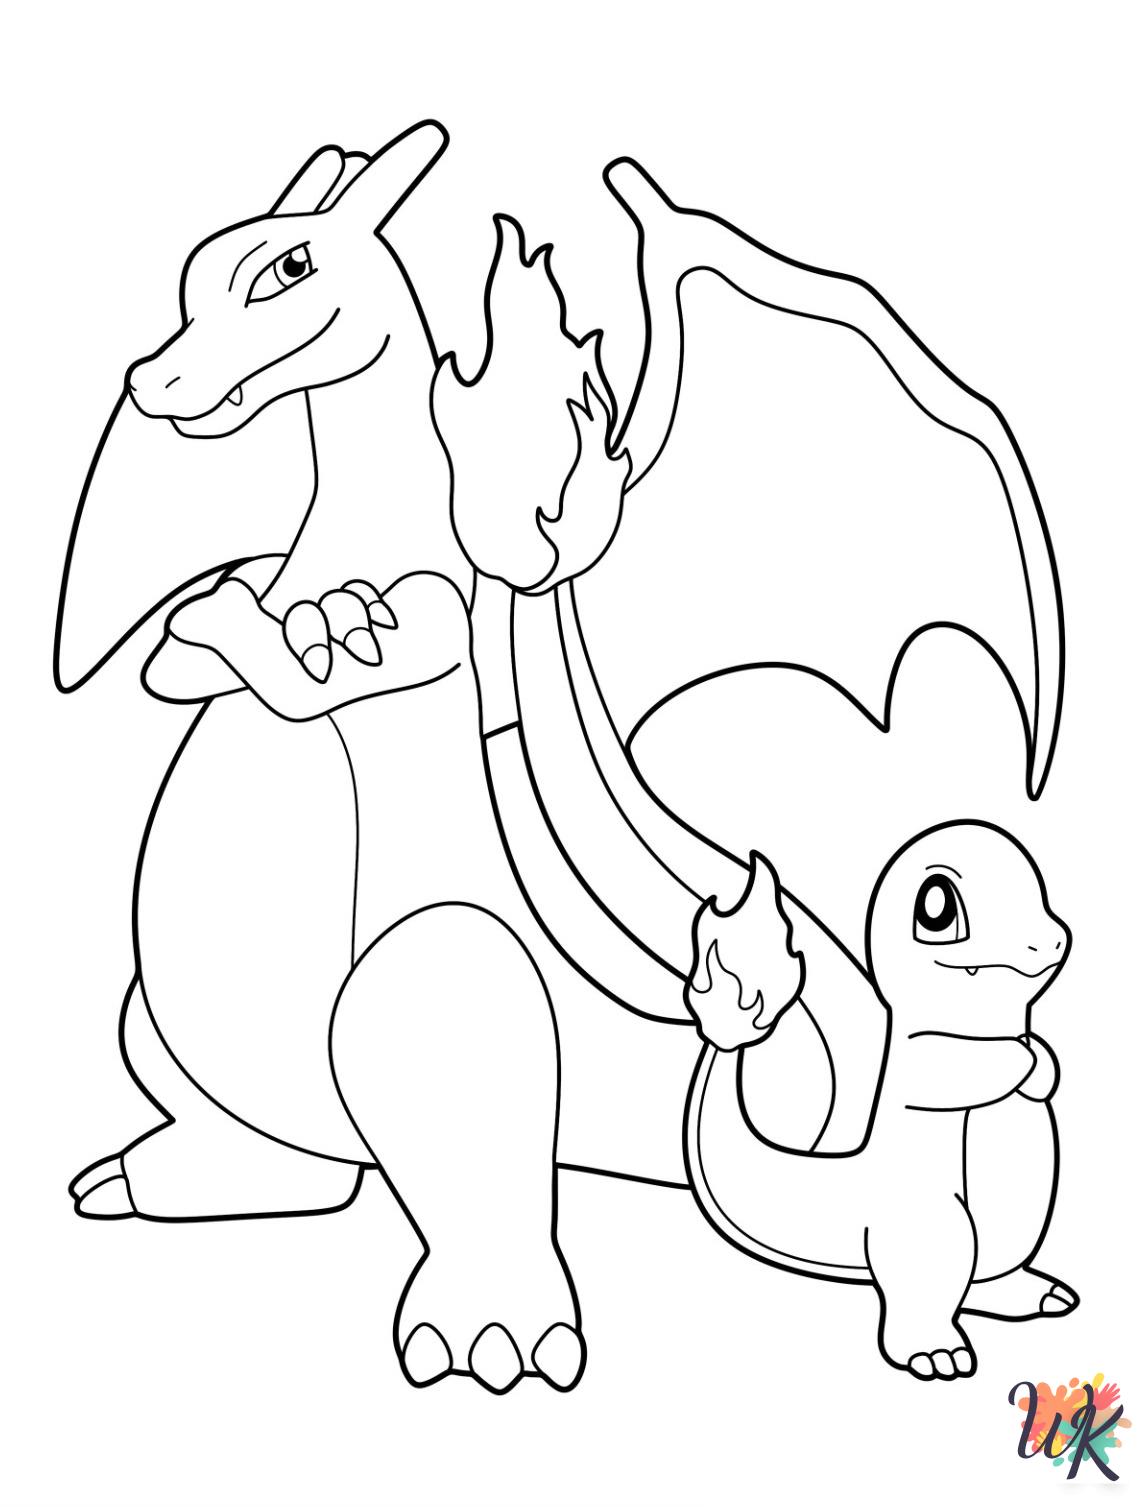 Charmander coloring pages to print